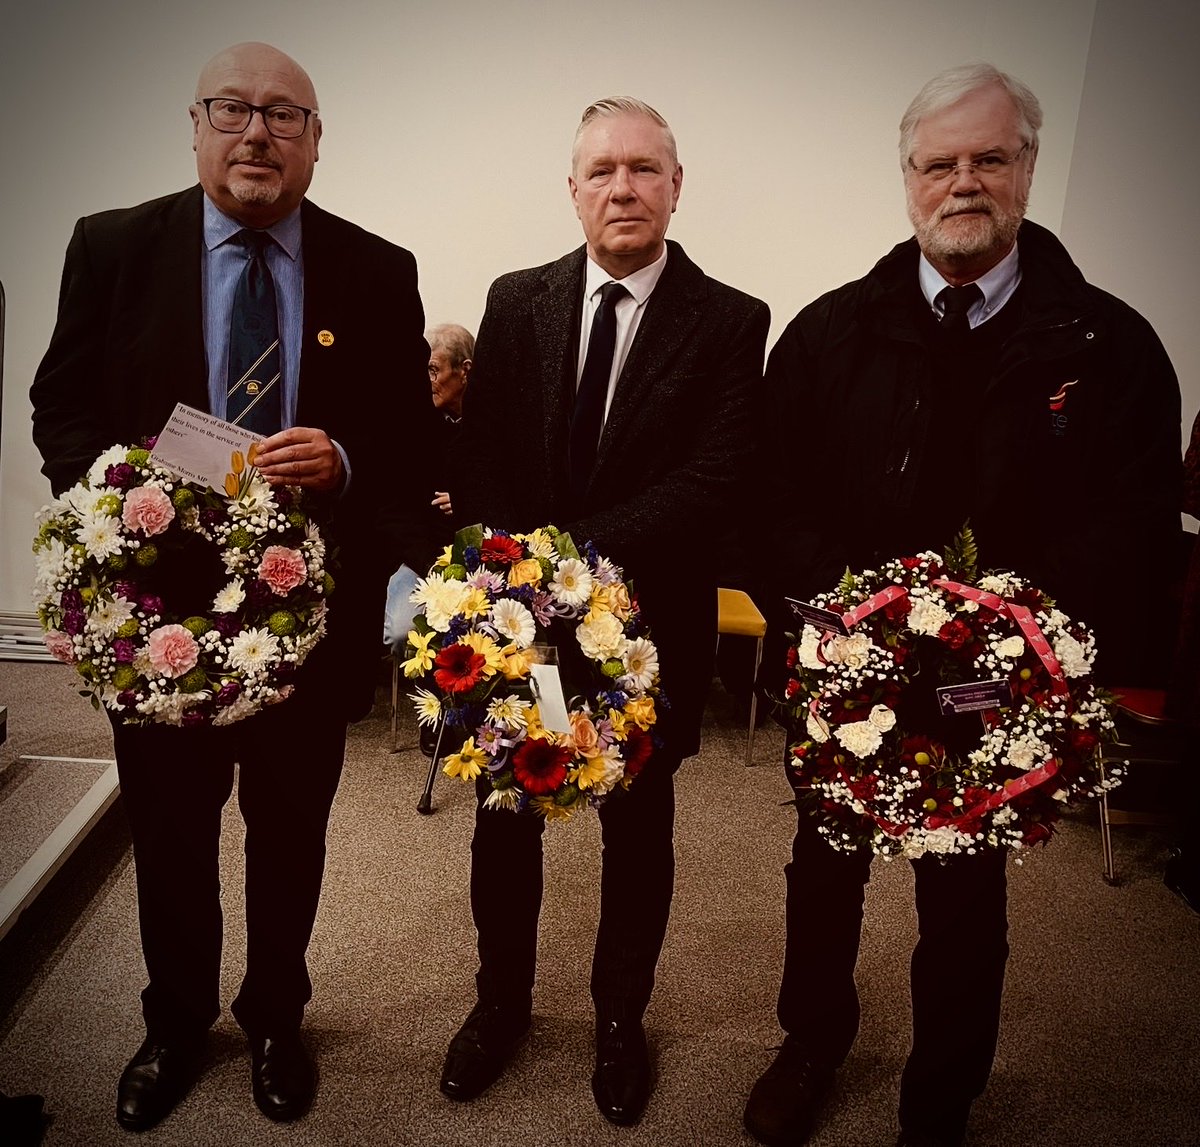 In Hartlepool this afternoon for International Workers’ Memorial Day when we come together each year to remember those who lost their lives in the workplace and those who suffer from work-related injury and disease. We remember the dead and fight for the living.